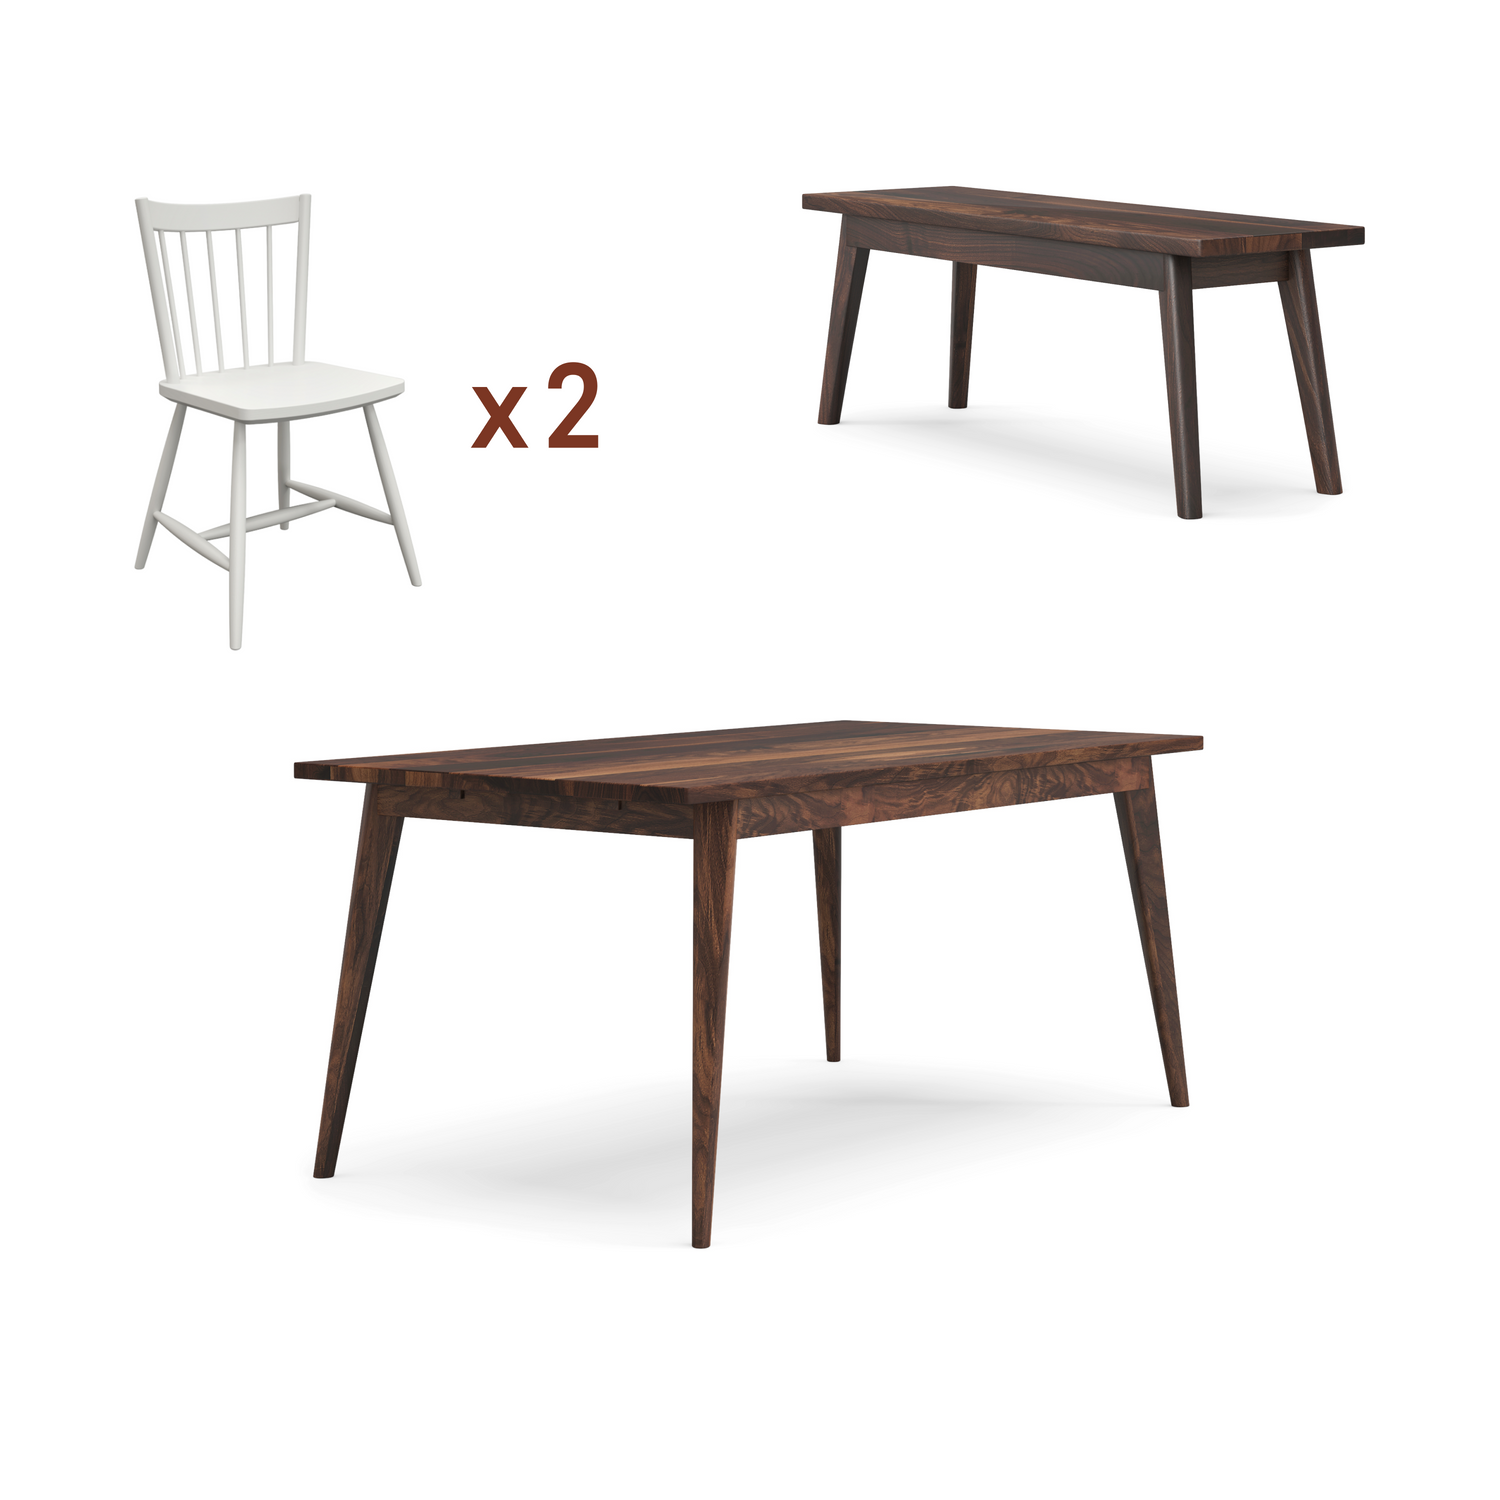 Oslo table + bench + chairs bundle